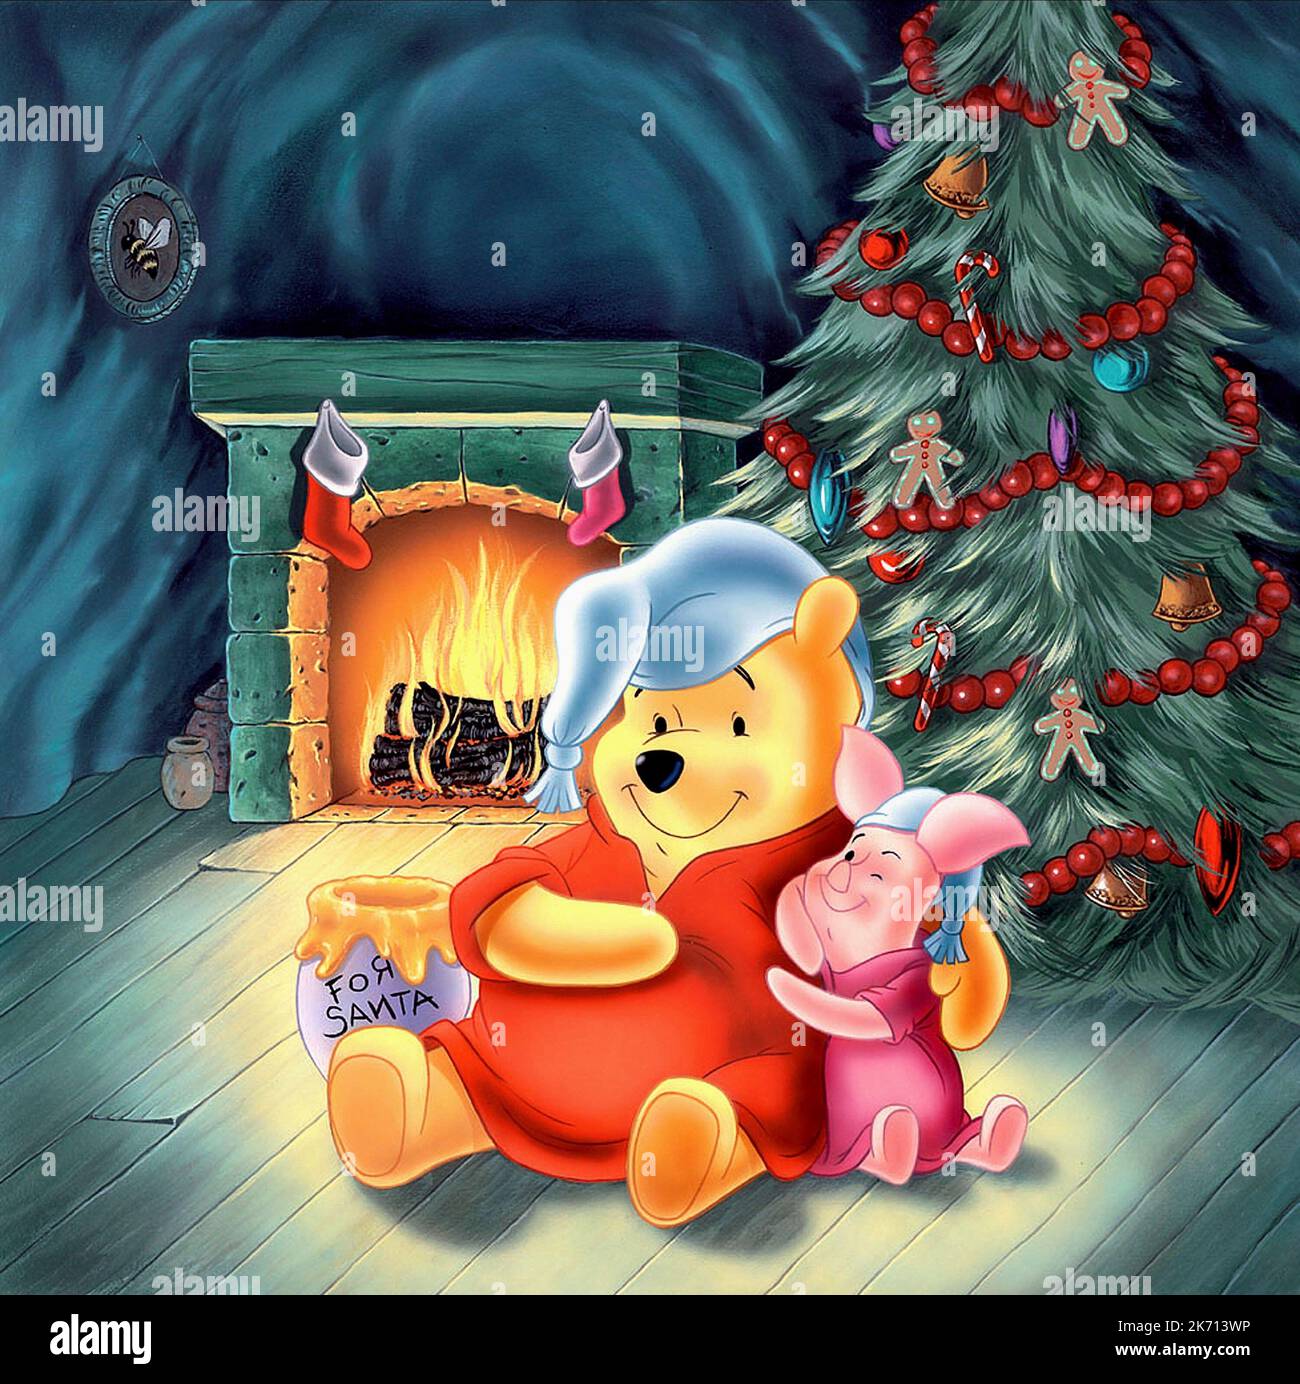 POOH,PIGLET, WINNIE THE POOH: A VERY MERRY POOH YEAR, 2002 Stock Photo